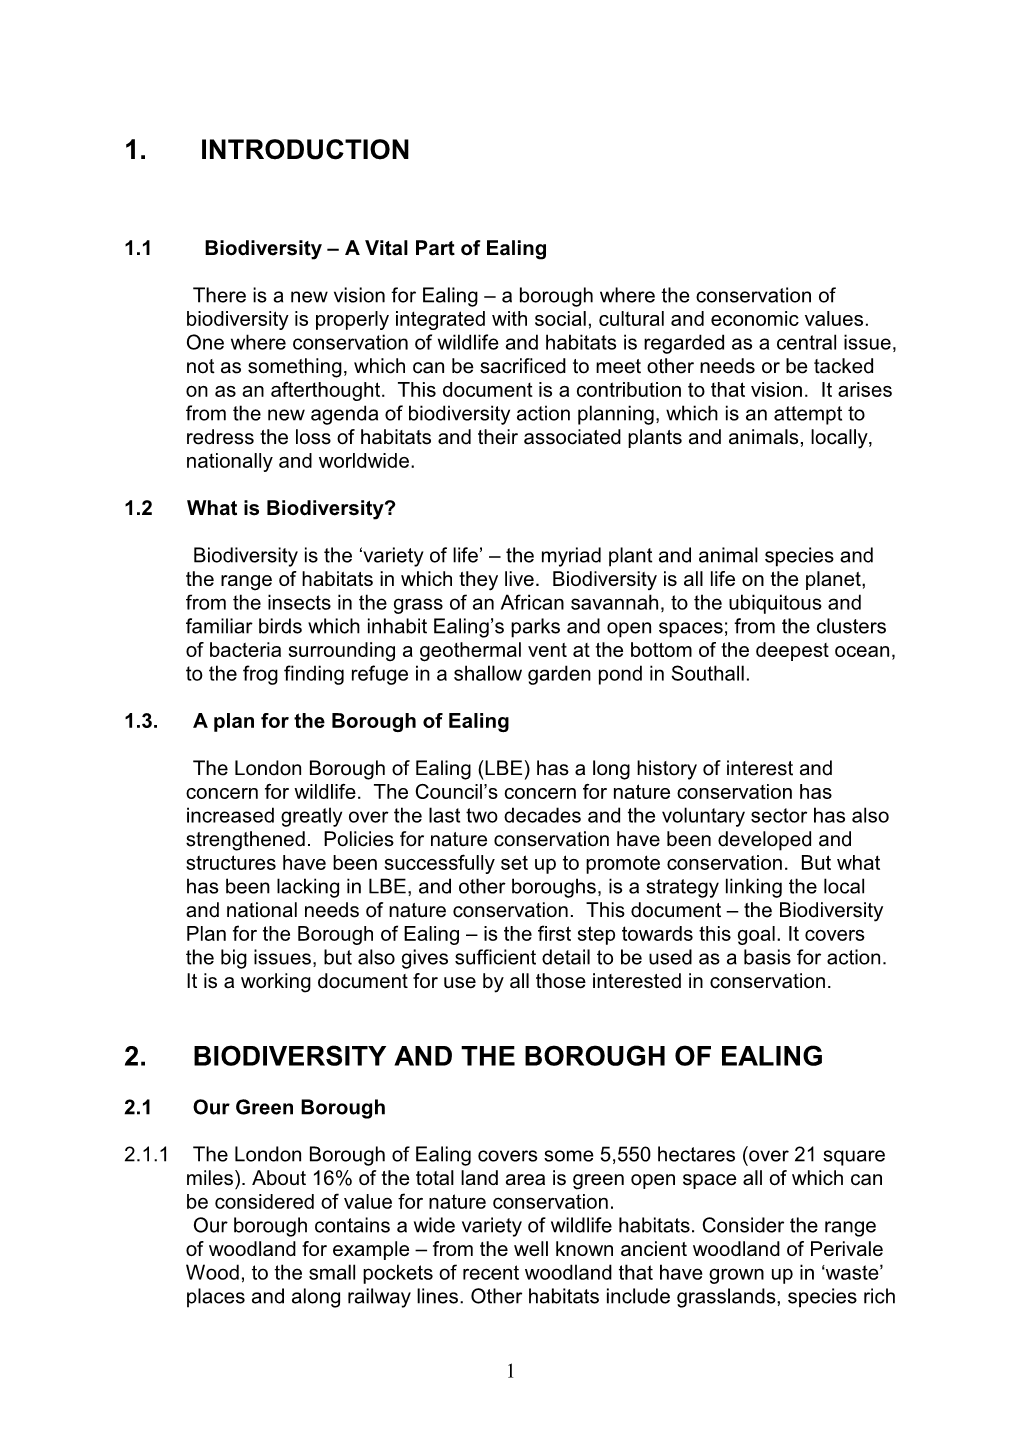 1. Introduction 2. Biodiversity and the Borough of Ealing